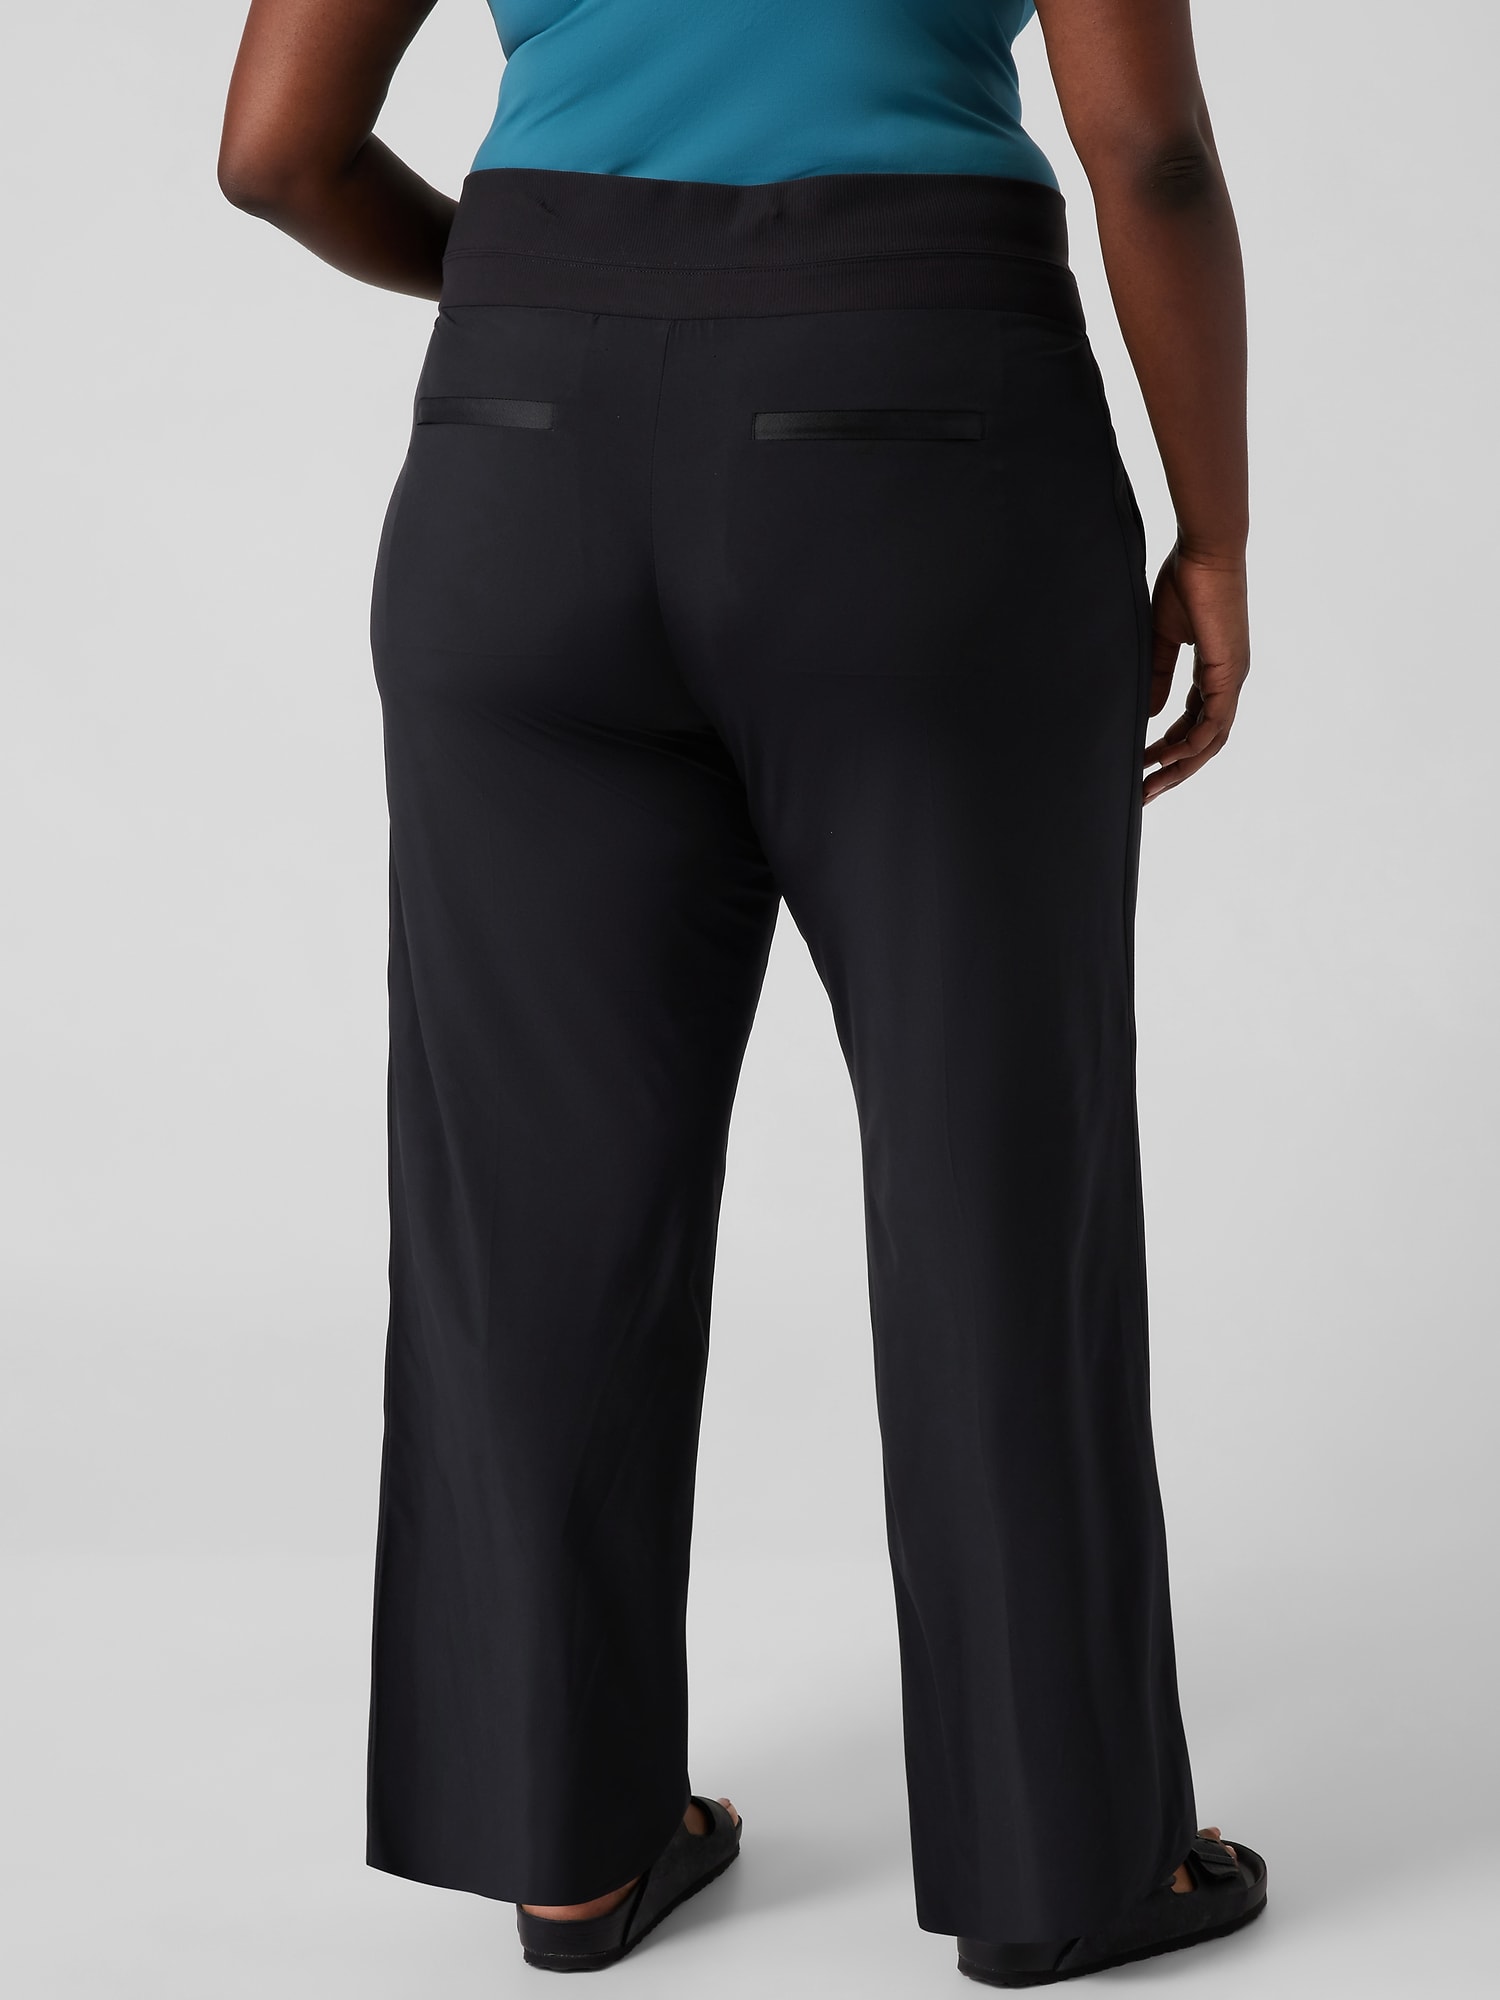 Athleta Solid Tan Active Pants Size 0 - 61% off